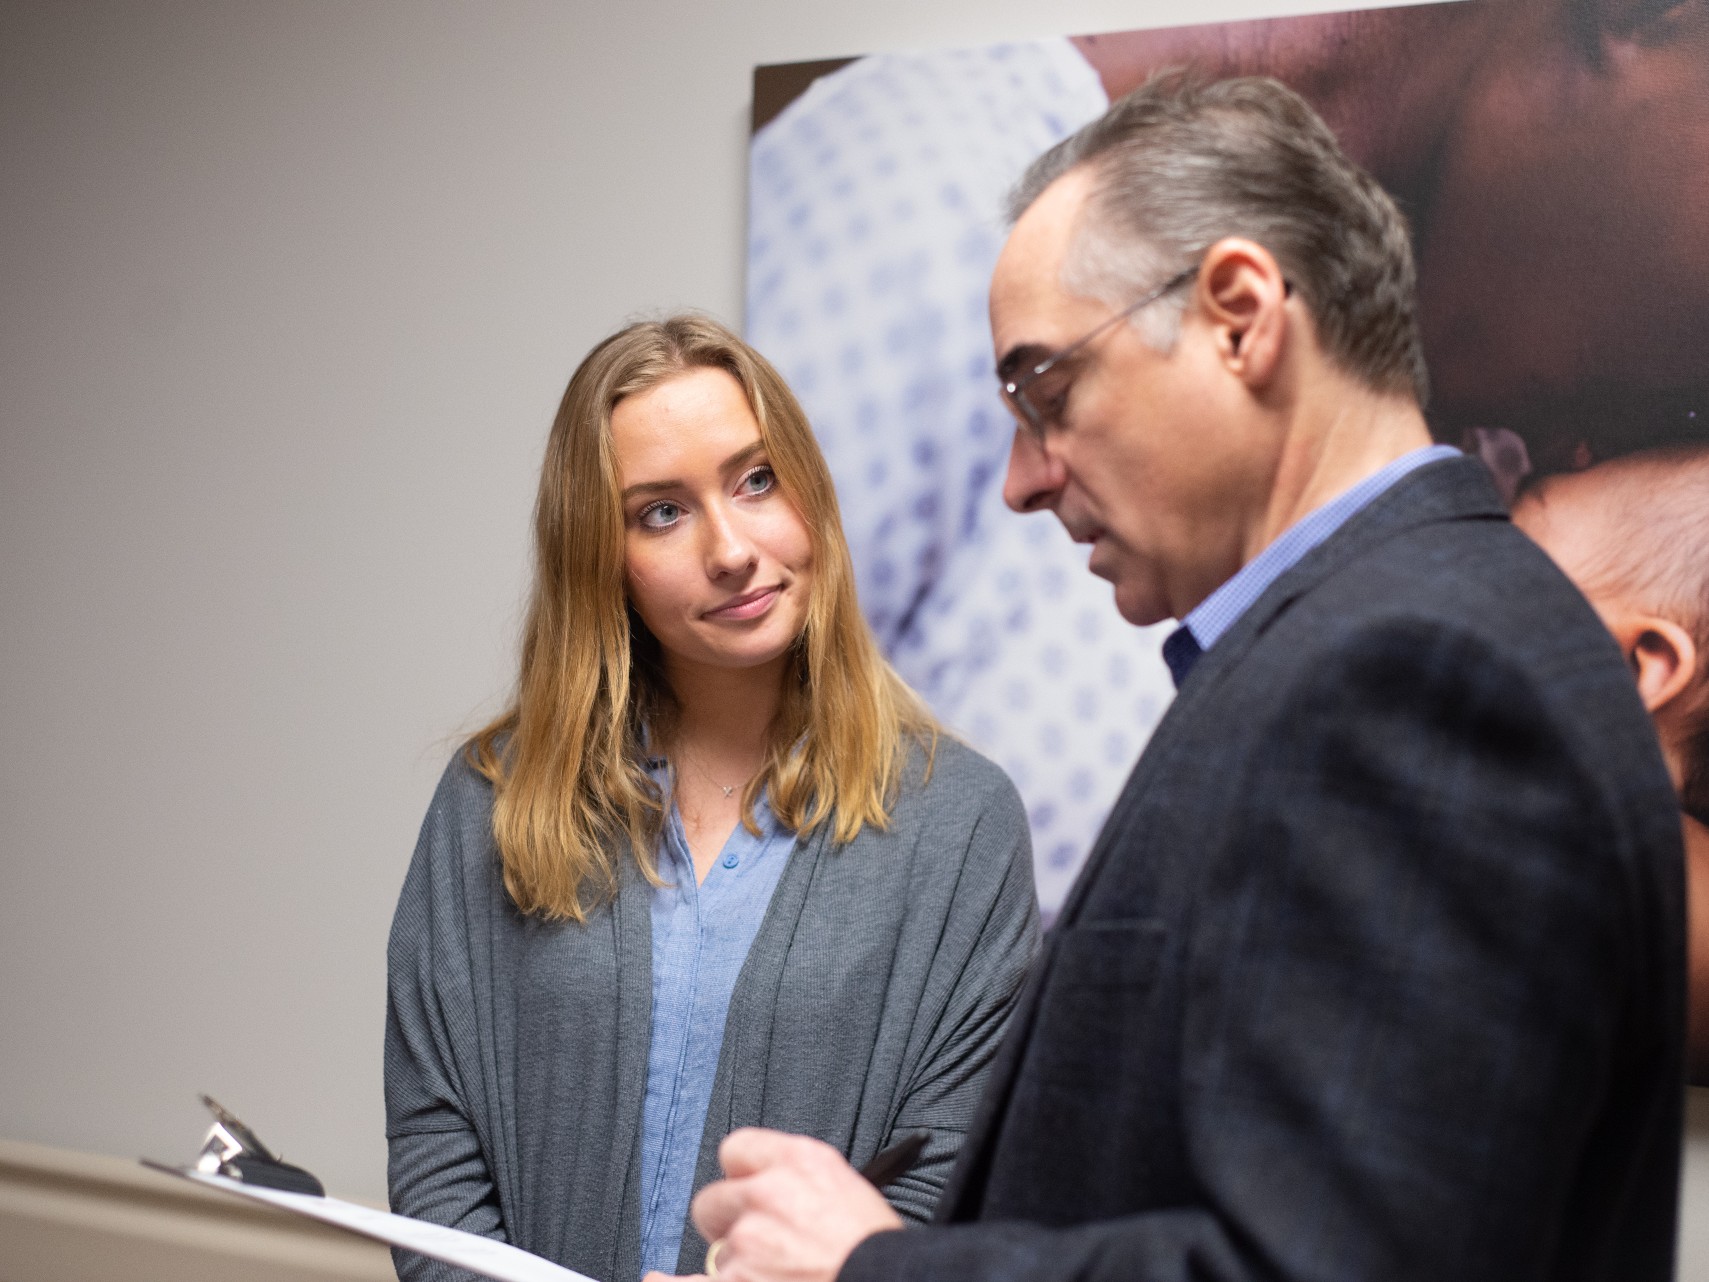 Meredith Krewson '20 took on a healthcare internship at Geisinger Health Network. The Career Center can help connect students with job shadowing and internship opportunities.